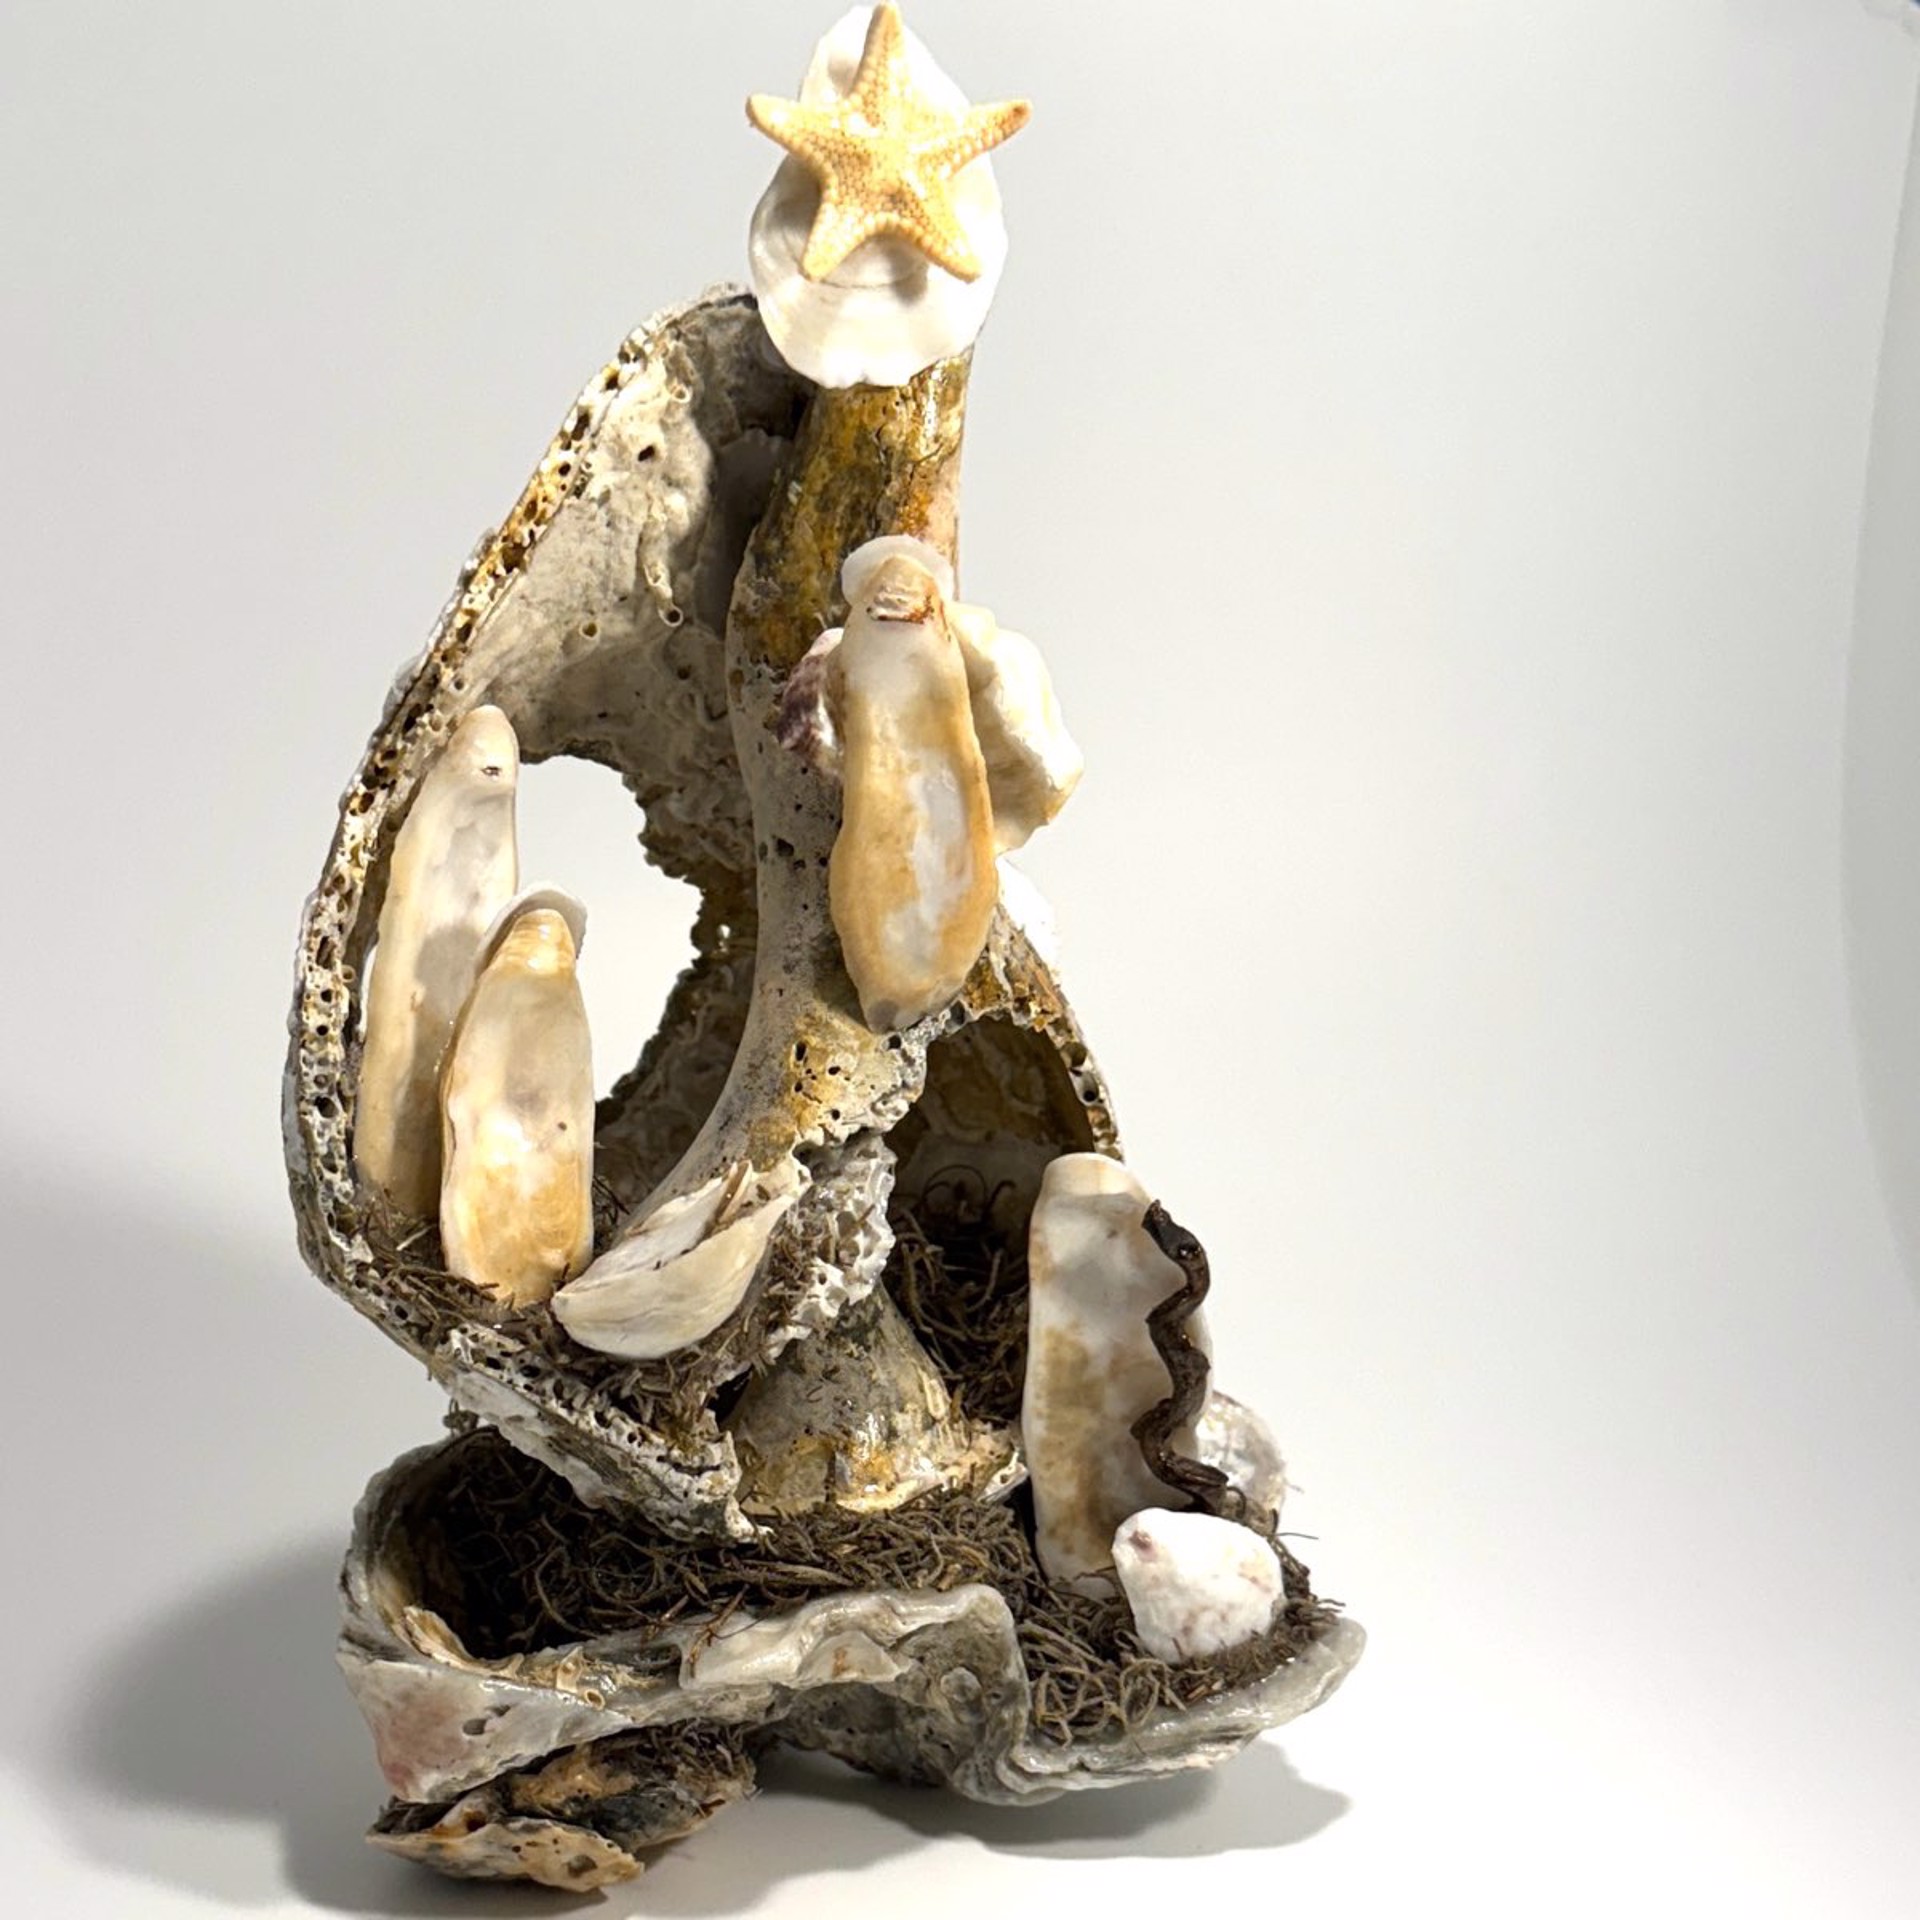 Standing Whelk on Oyster Shell, Crèche of the Sea CN23-51 by Chris Nietert